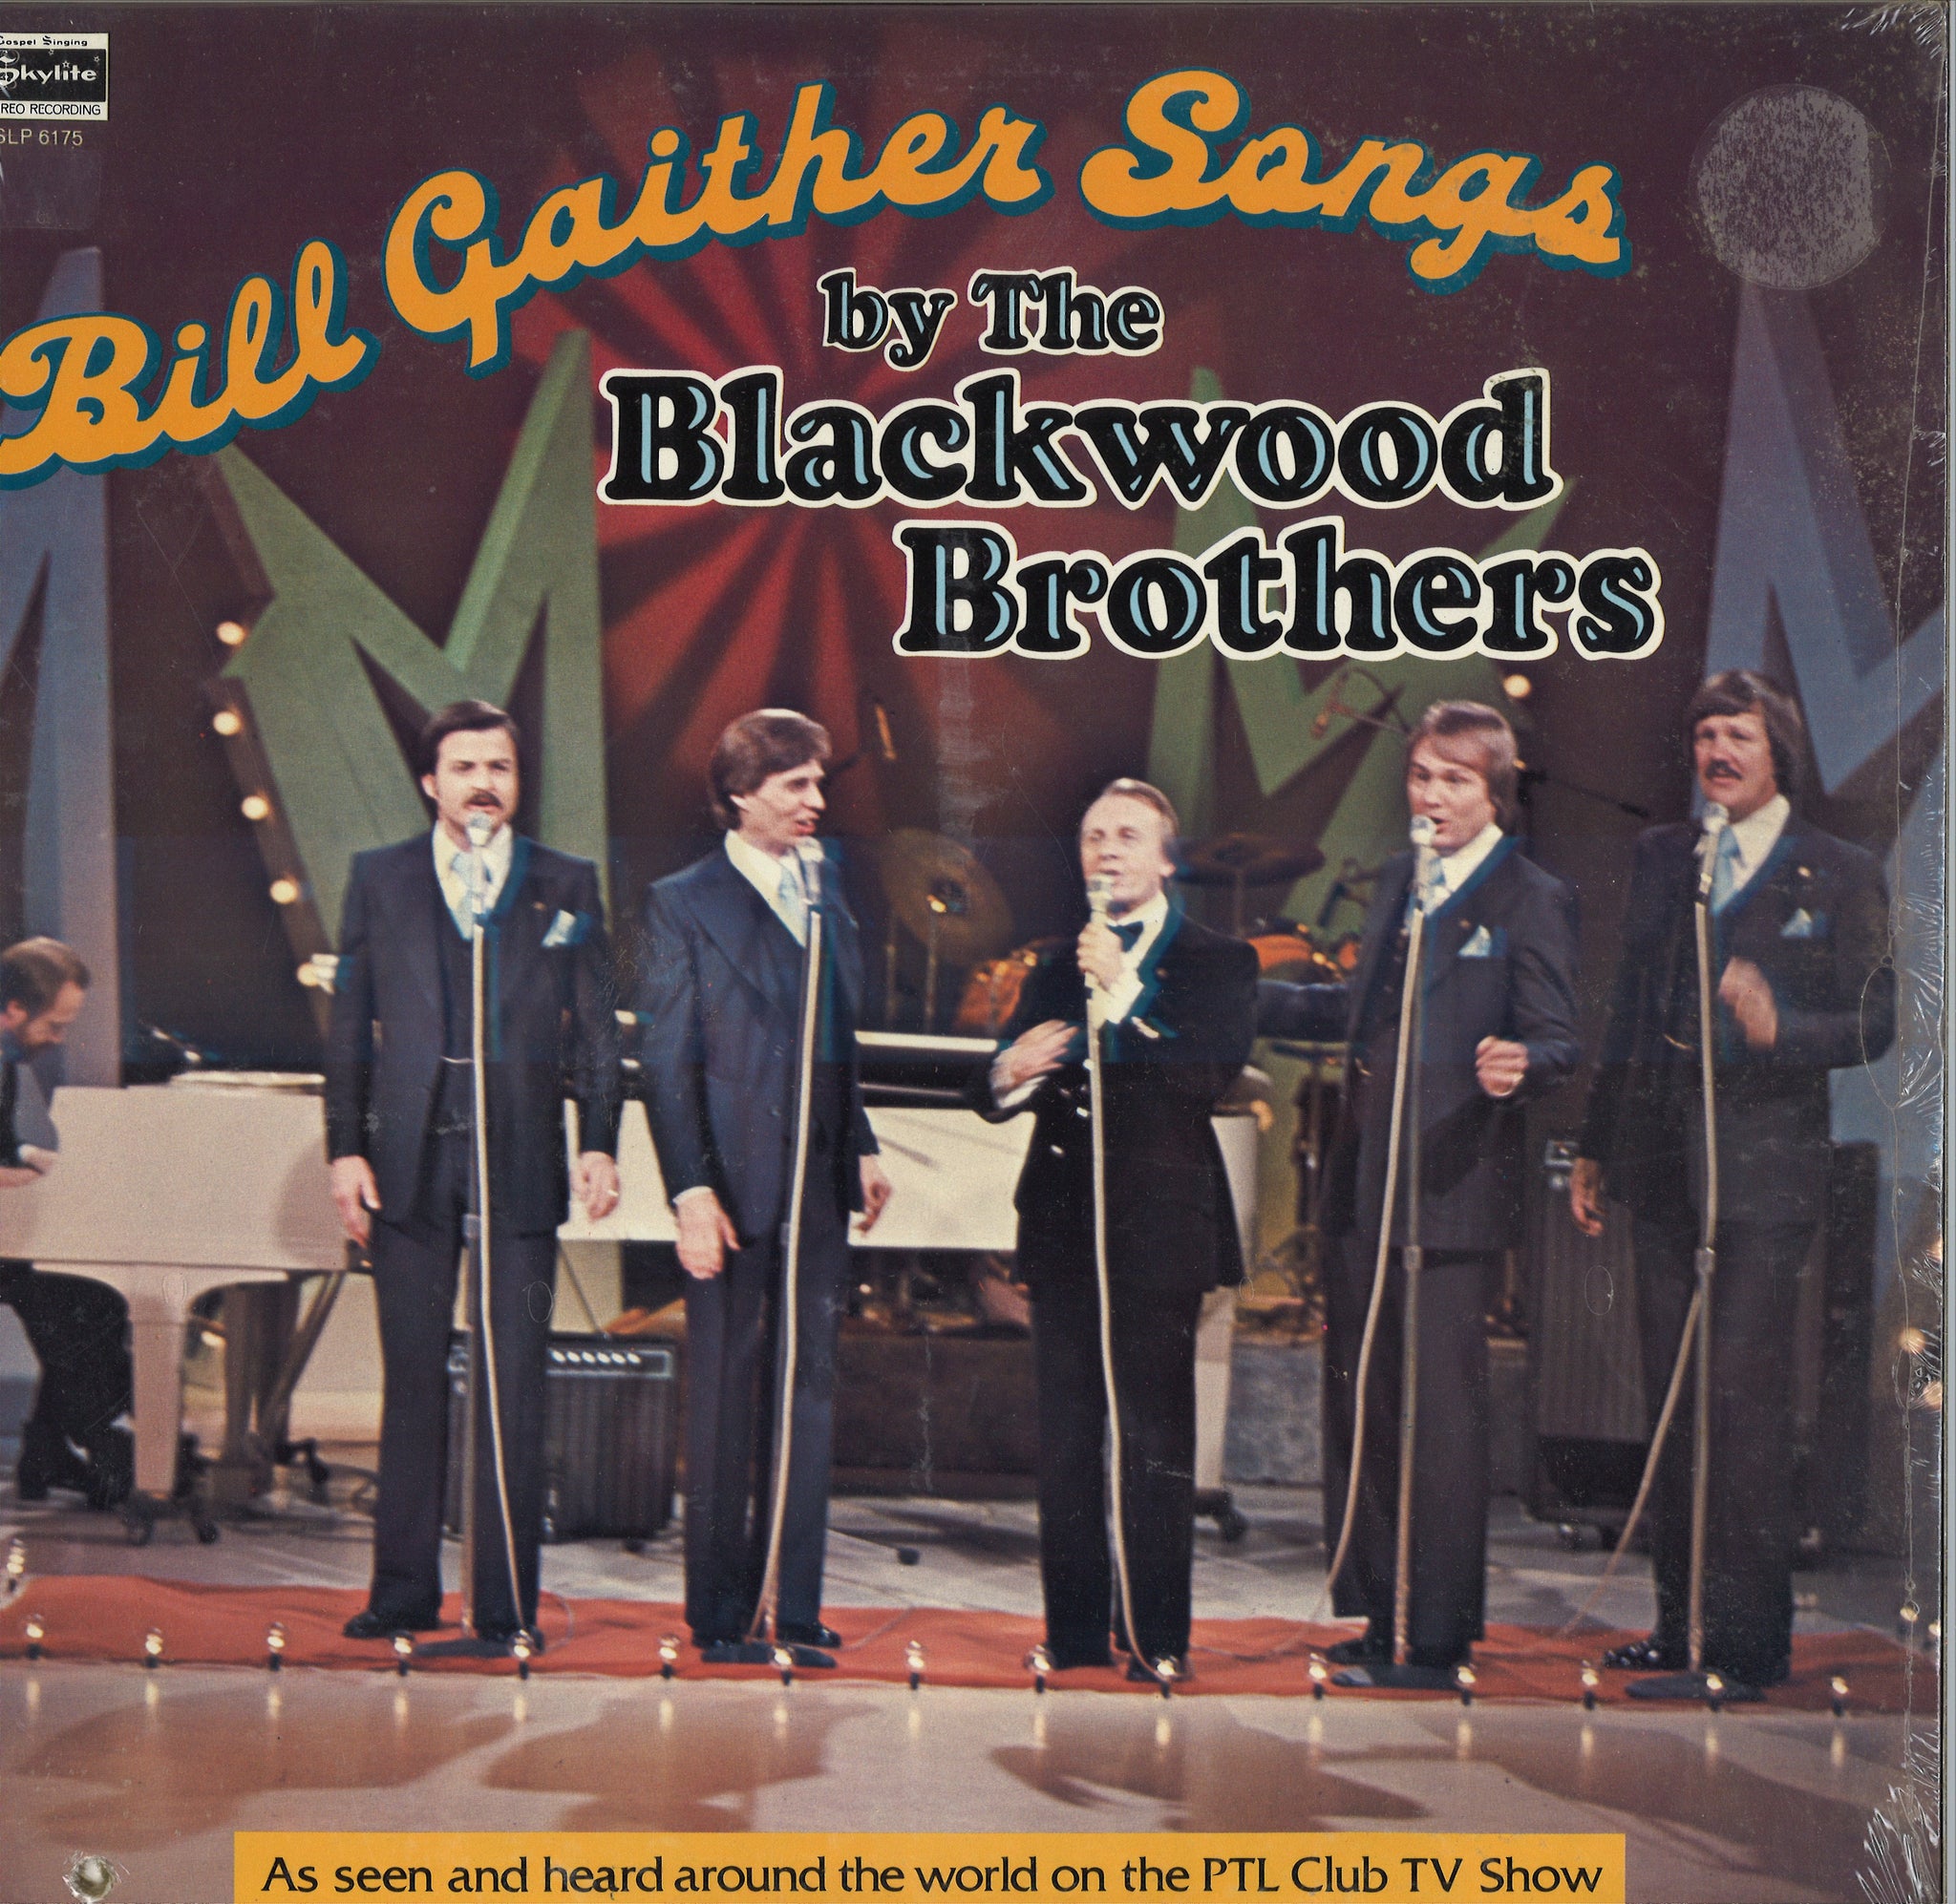 Bill Gaither Songs By The Blackwood Brothers